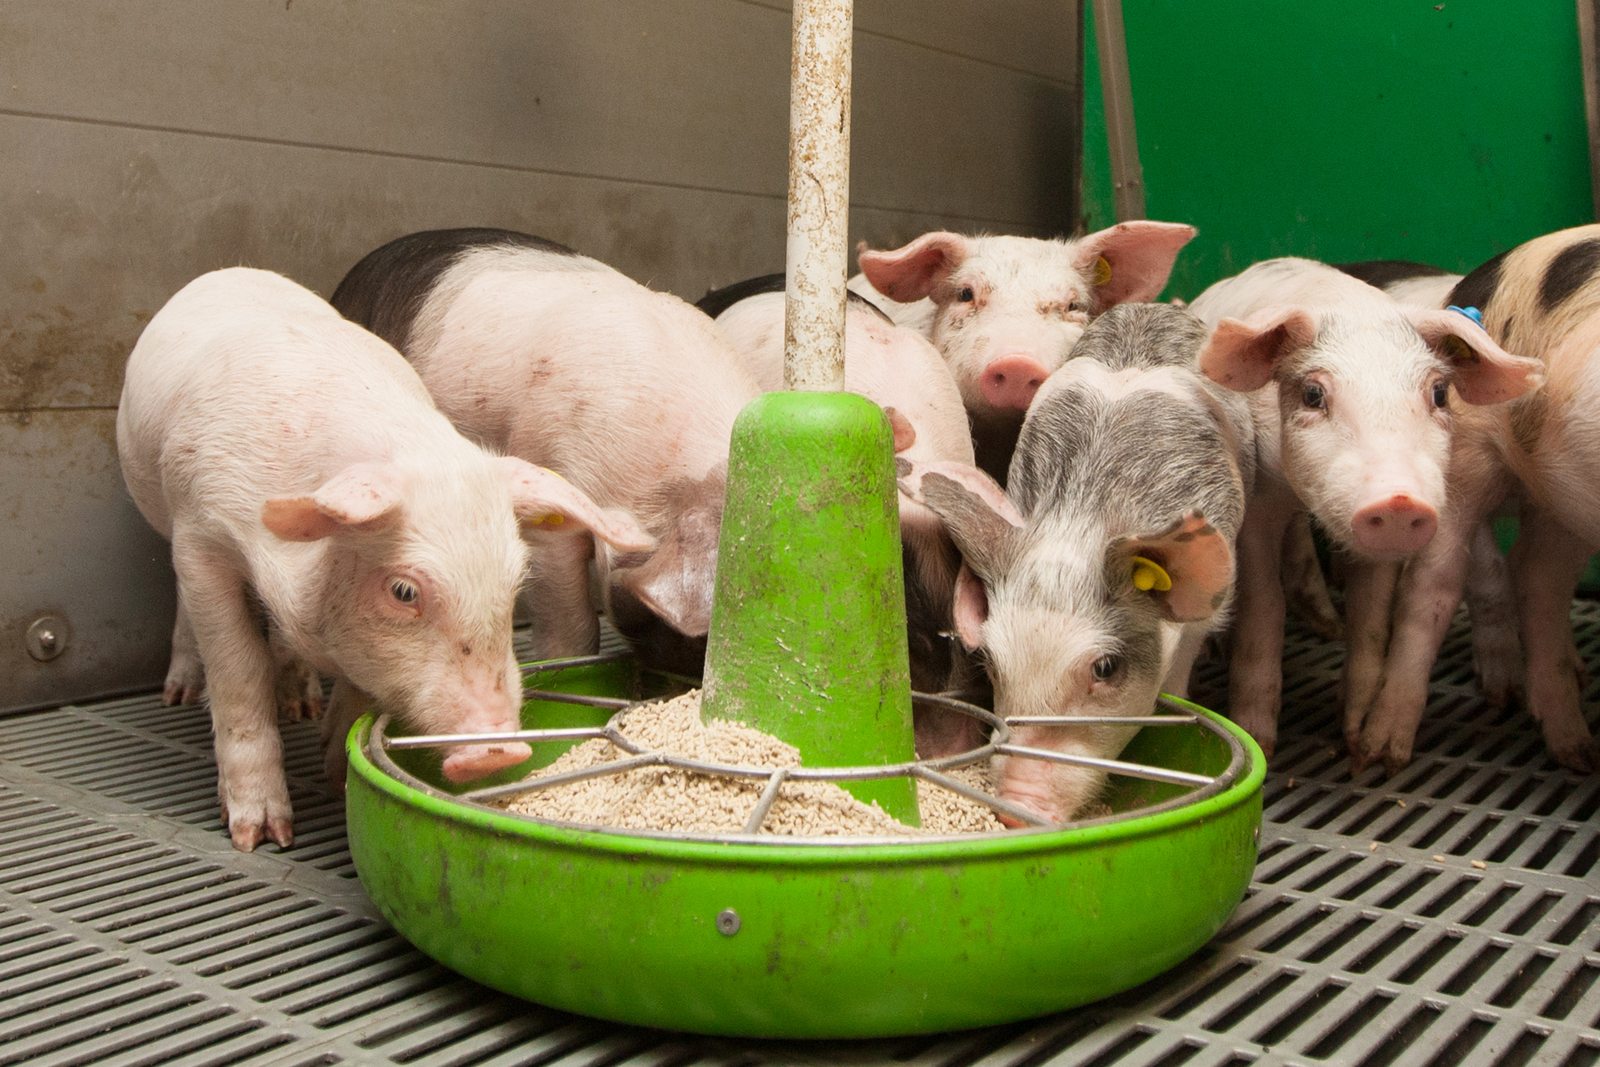 Yeast can step up immunity in pigs